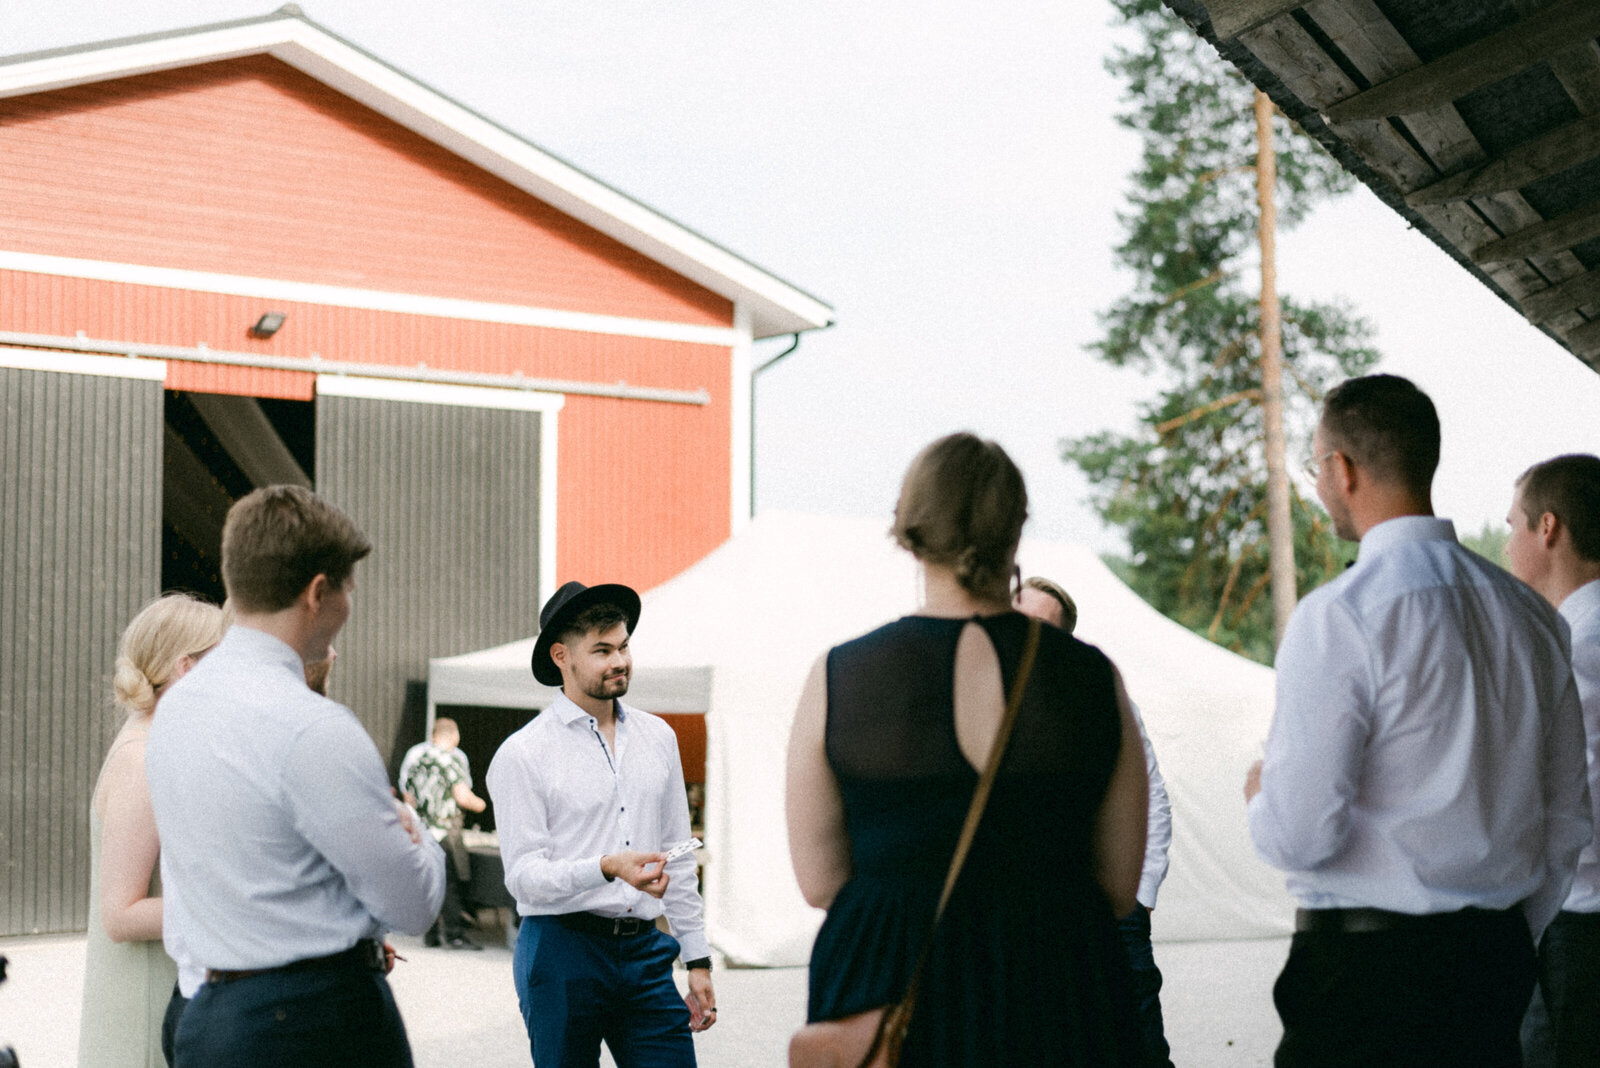 A magician showing tricks to the guests in the wedding in an image captured by wedding photographer Hannika Gabrielsson.